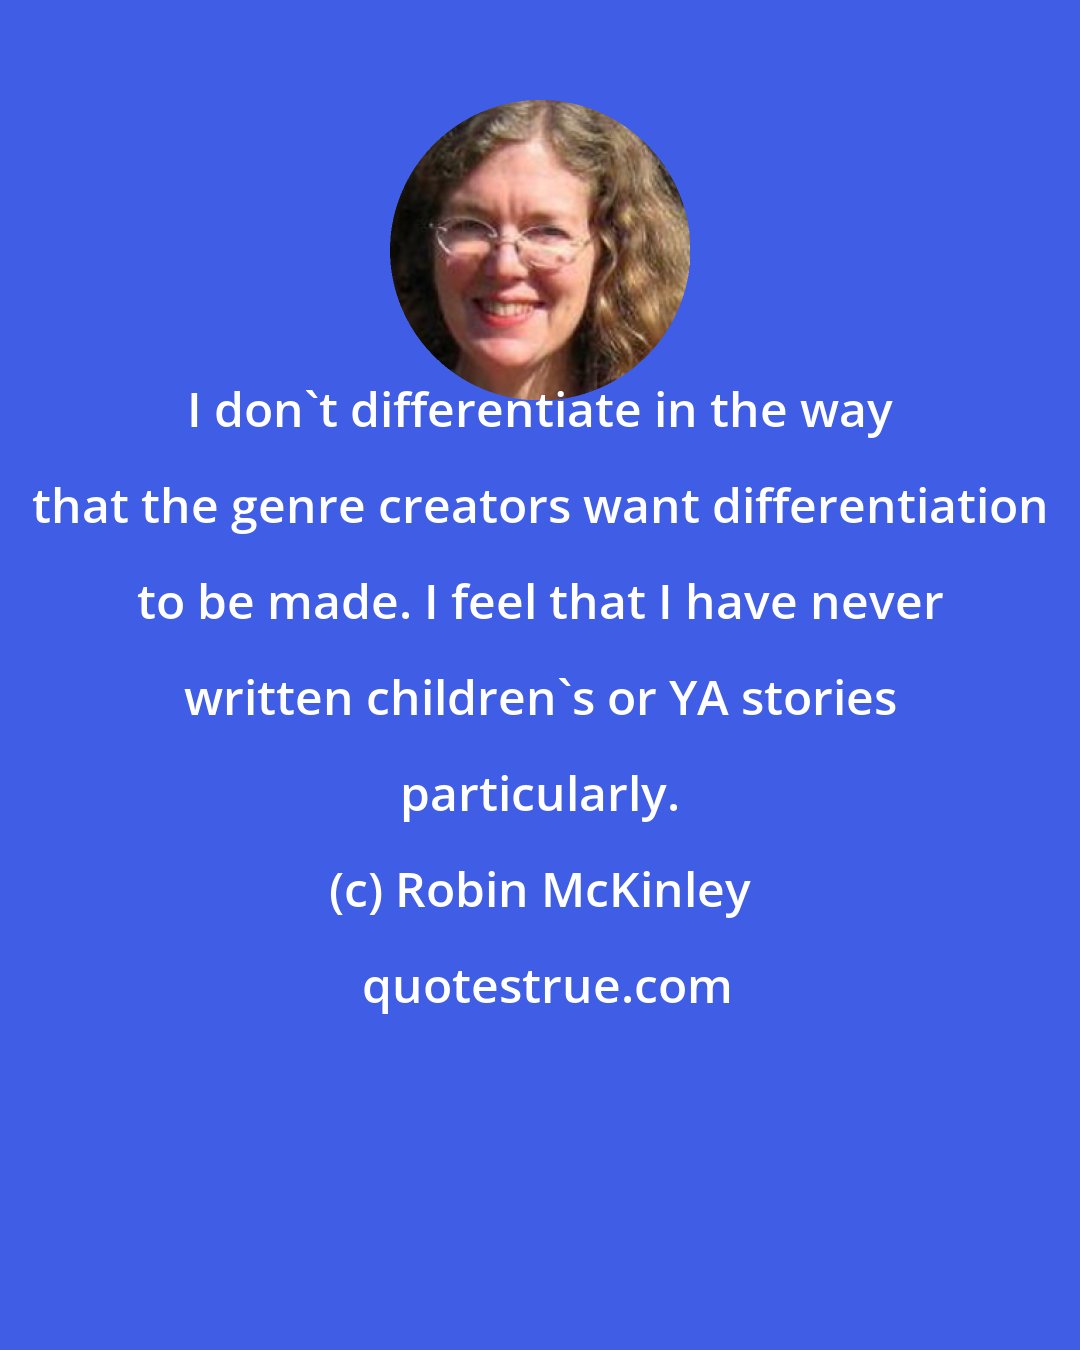 Robin McKinley: I don't differentiate in the way that the genre creators want differentiation to be made. I feel that I have never written children's or YA stories particularly.